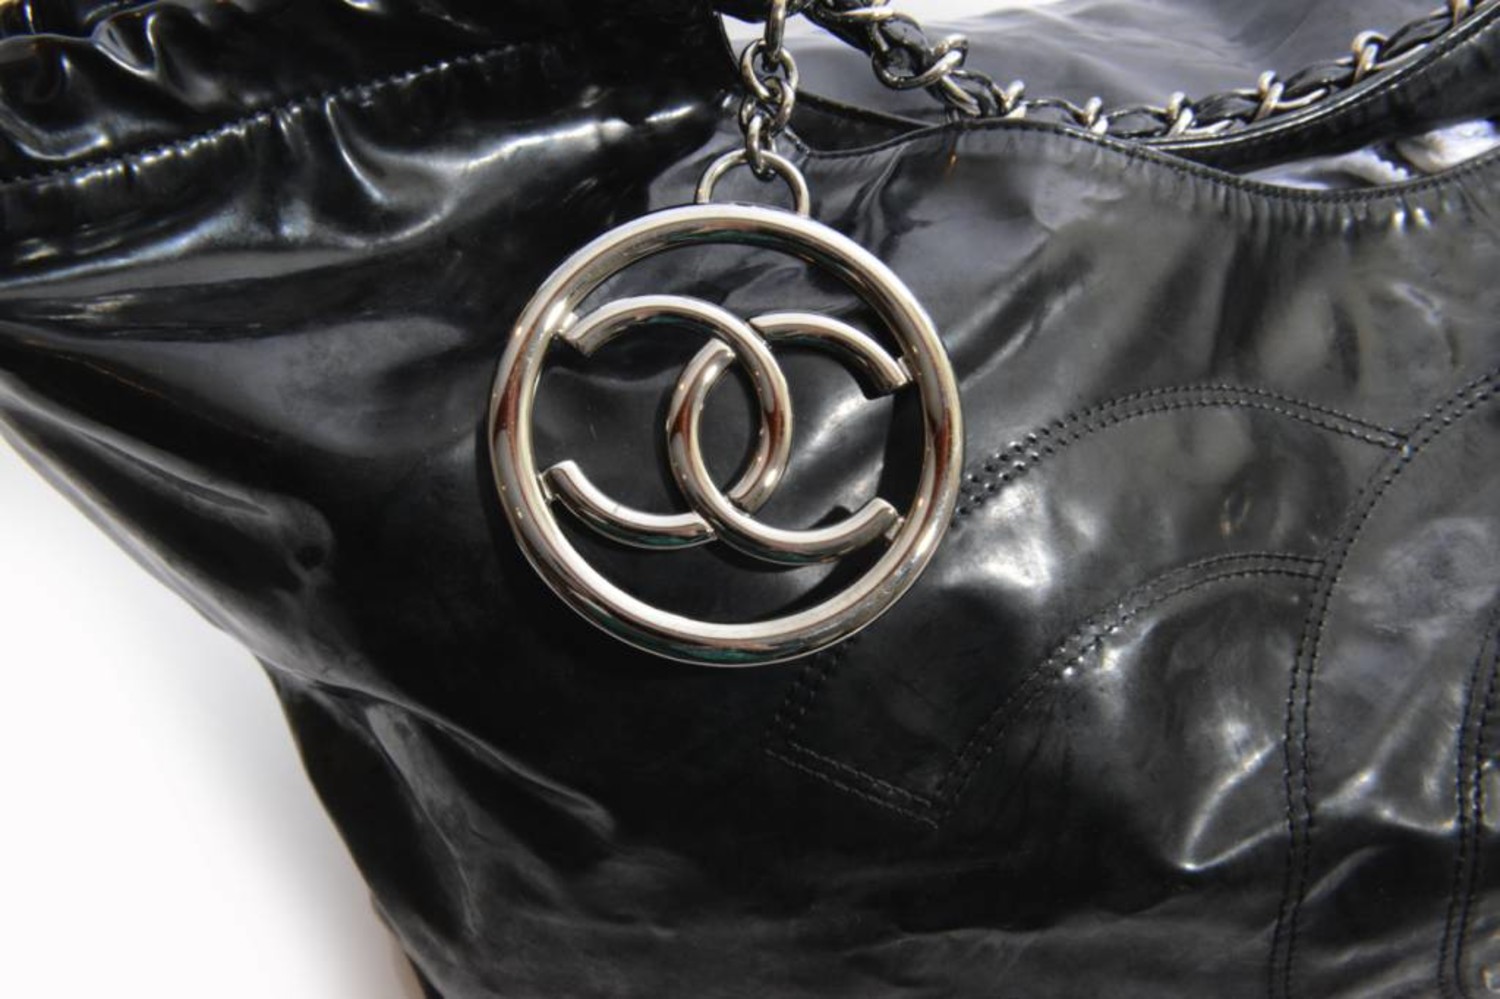 Chanel 'Coco Cabas' Tote Black Leather